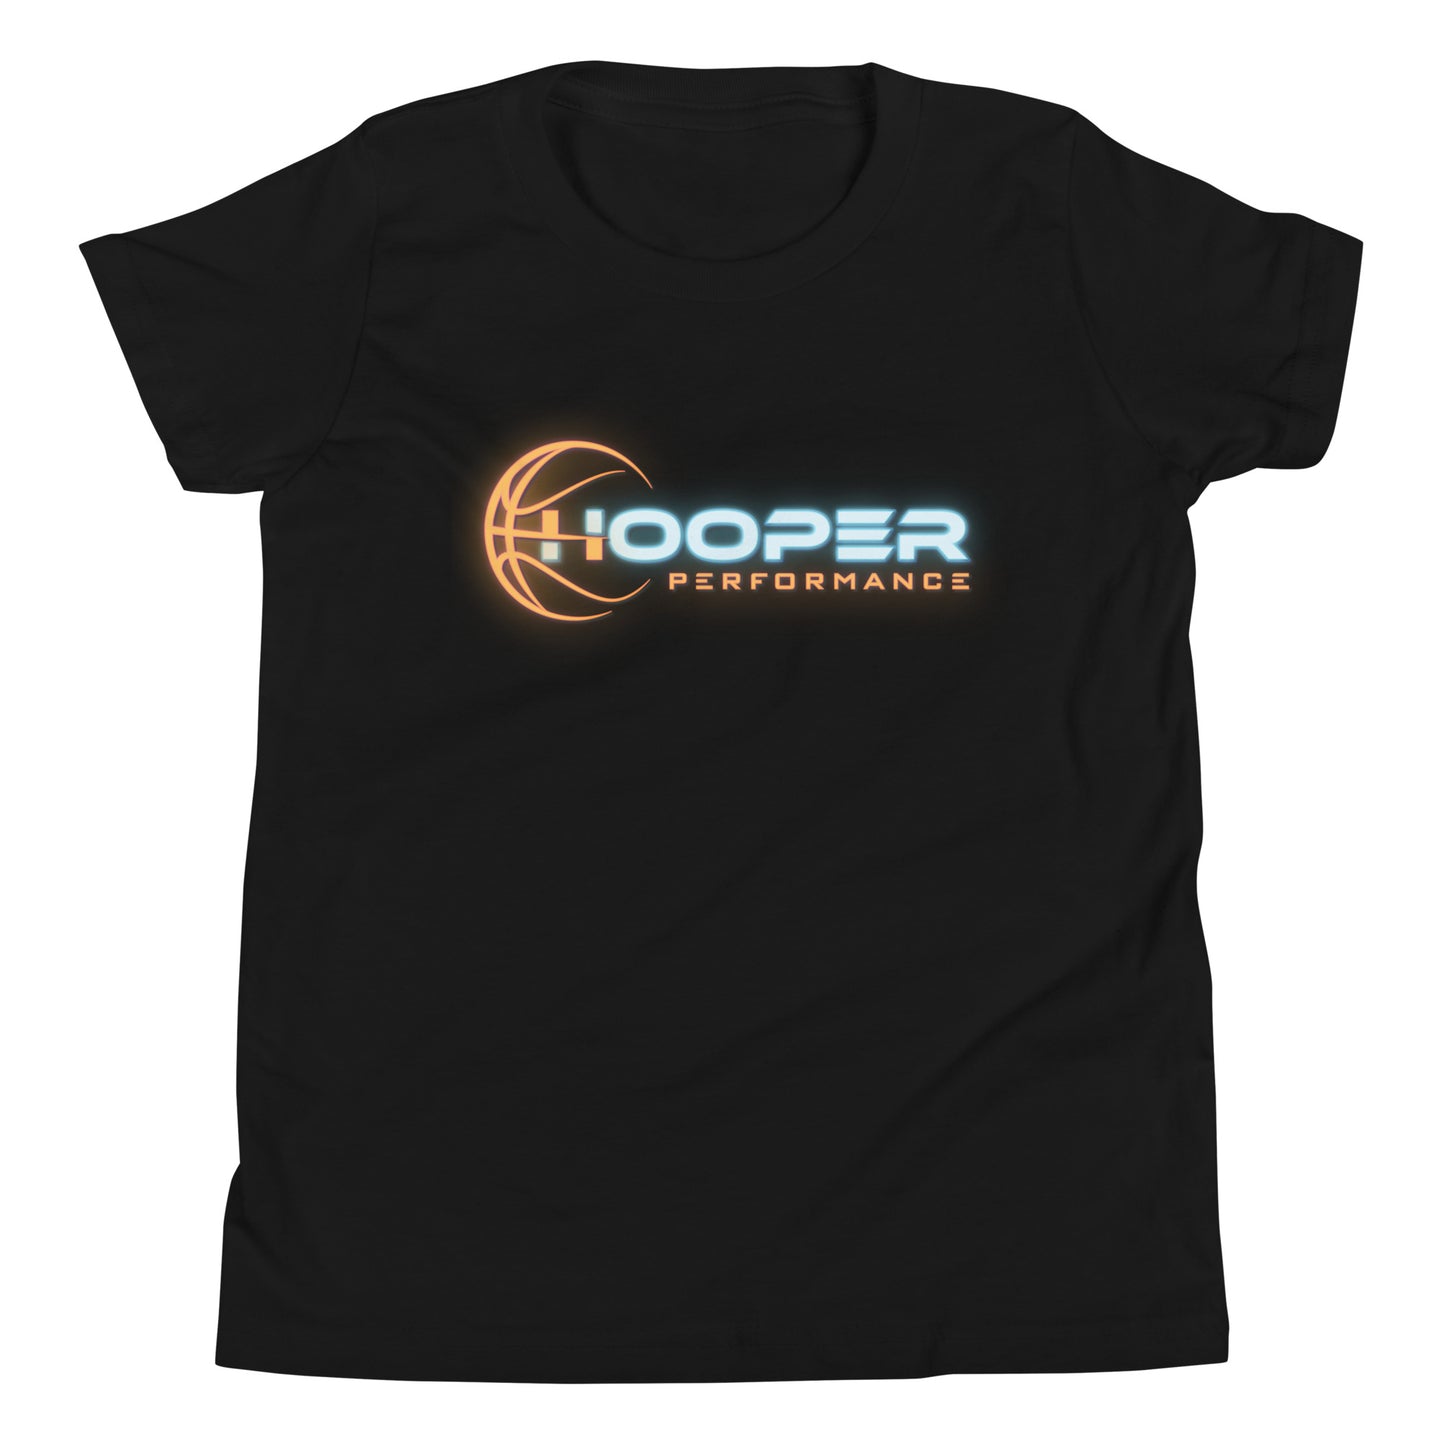 Hooper Performance Orange Color Youth Short Sleeve T-Shirt-Soft and Comfy for kids